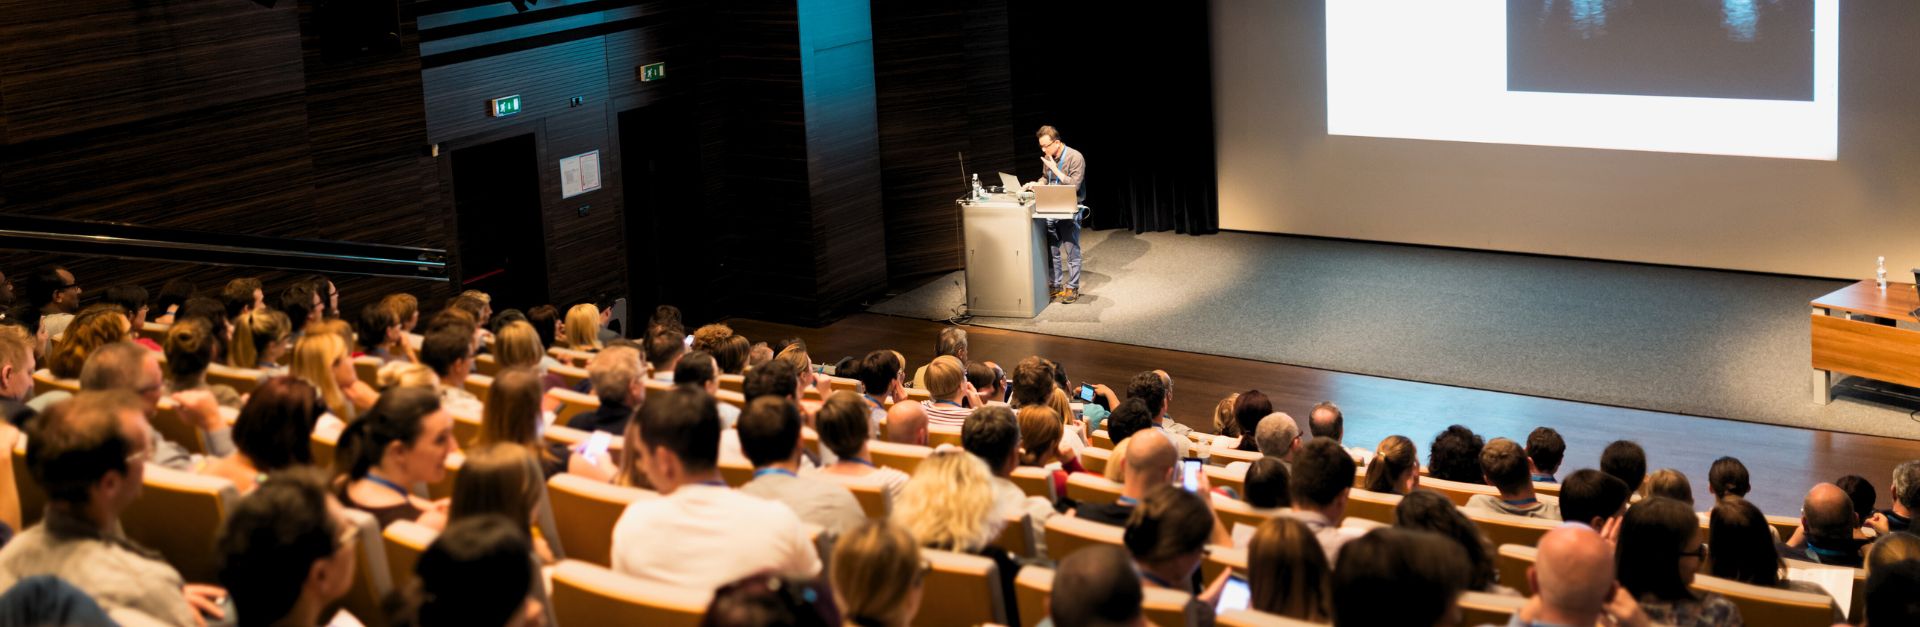 5 Dynamic Topics to Make Your Corporate Leadership Events Unforgettable